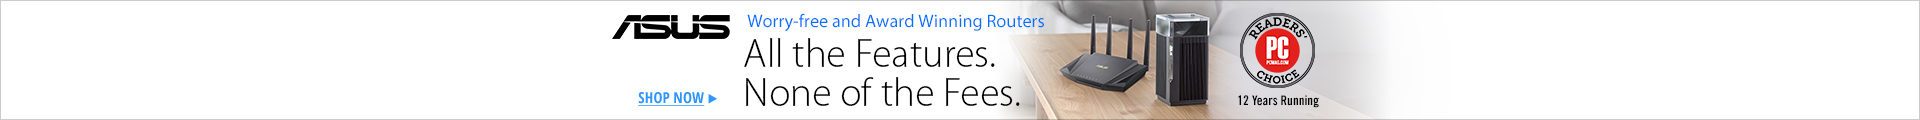 All the features. None of the Fees